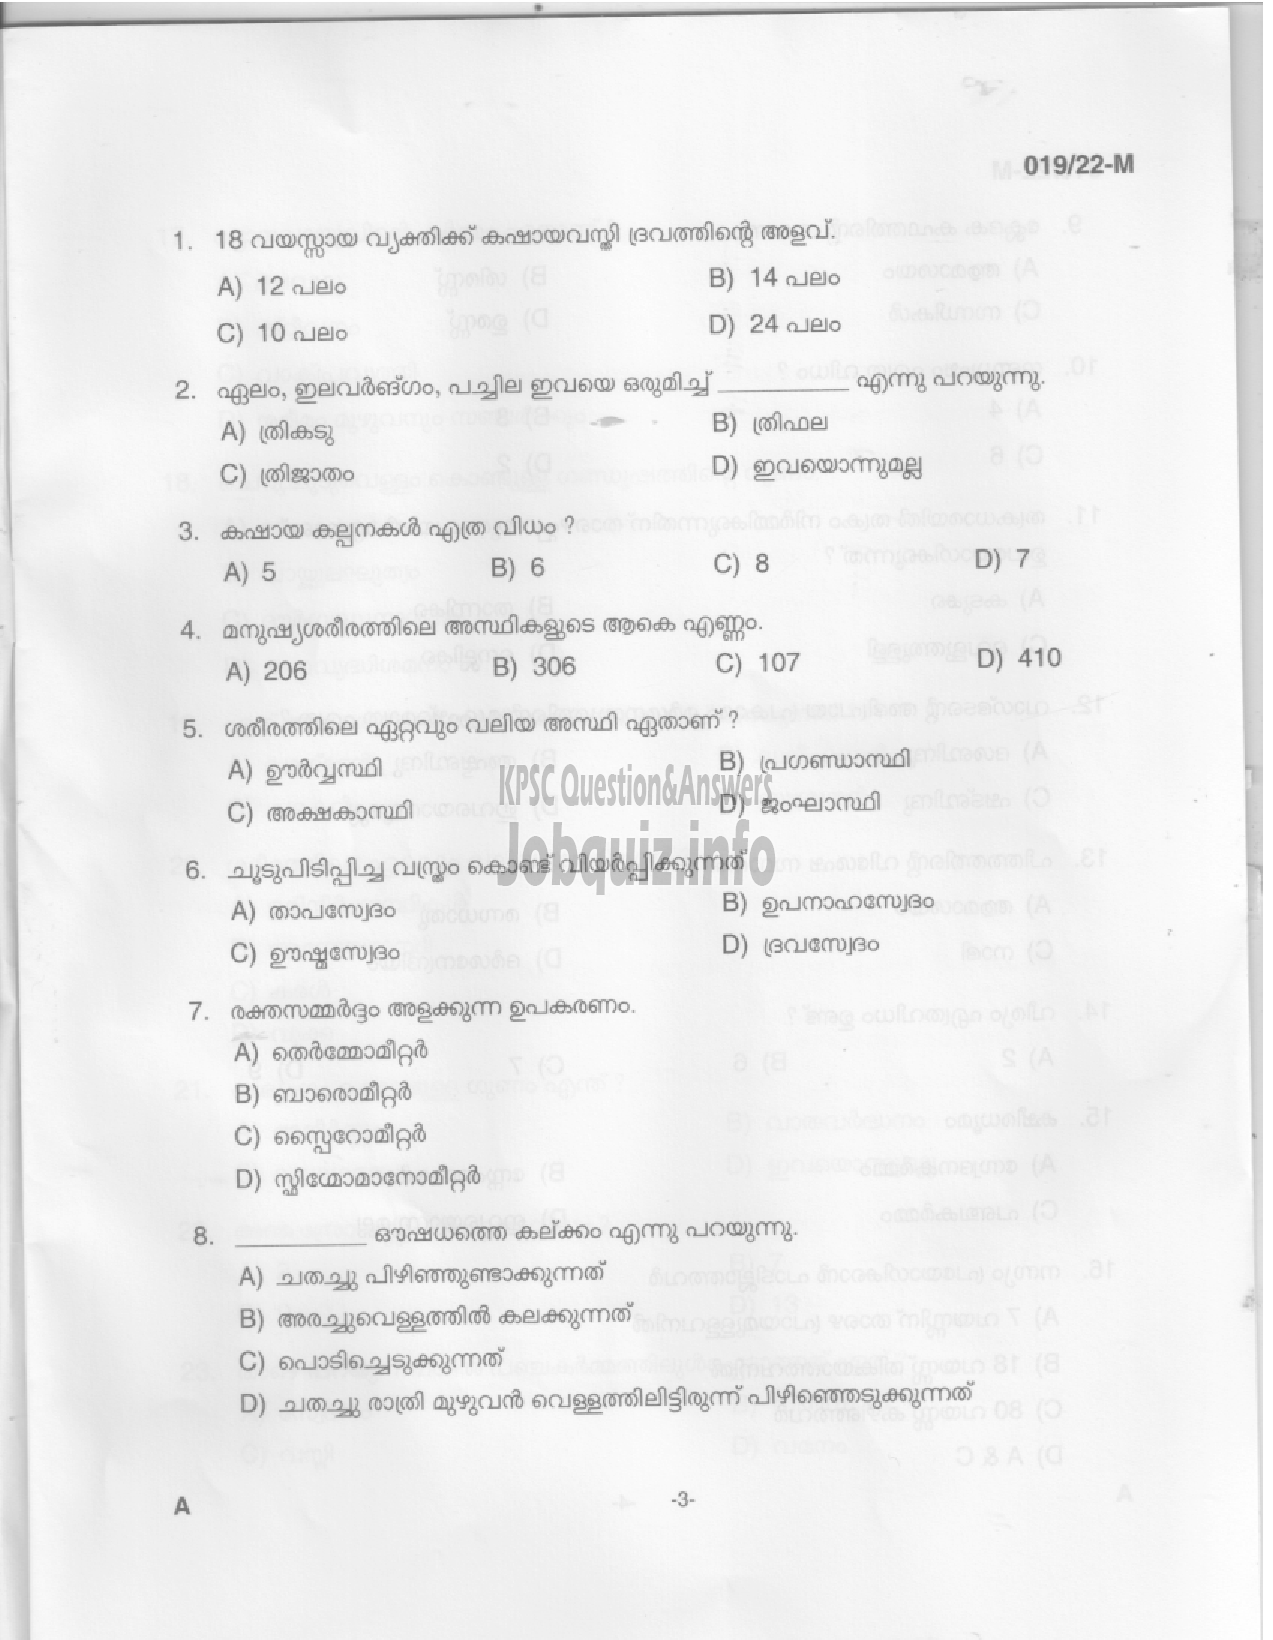 Kerala PSC Question Paper -  AYURVEDA THERAPIST - INDIAN SYSTEMS OF MEDICINE  -1